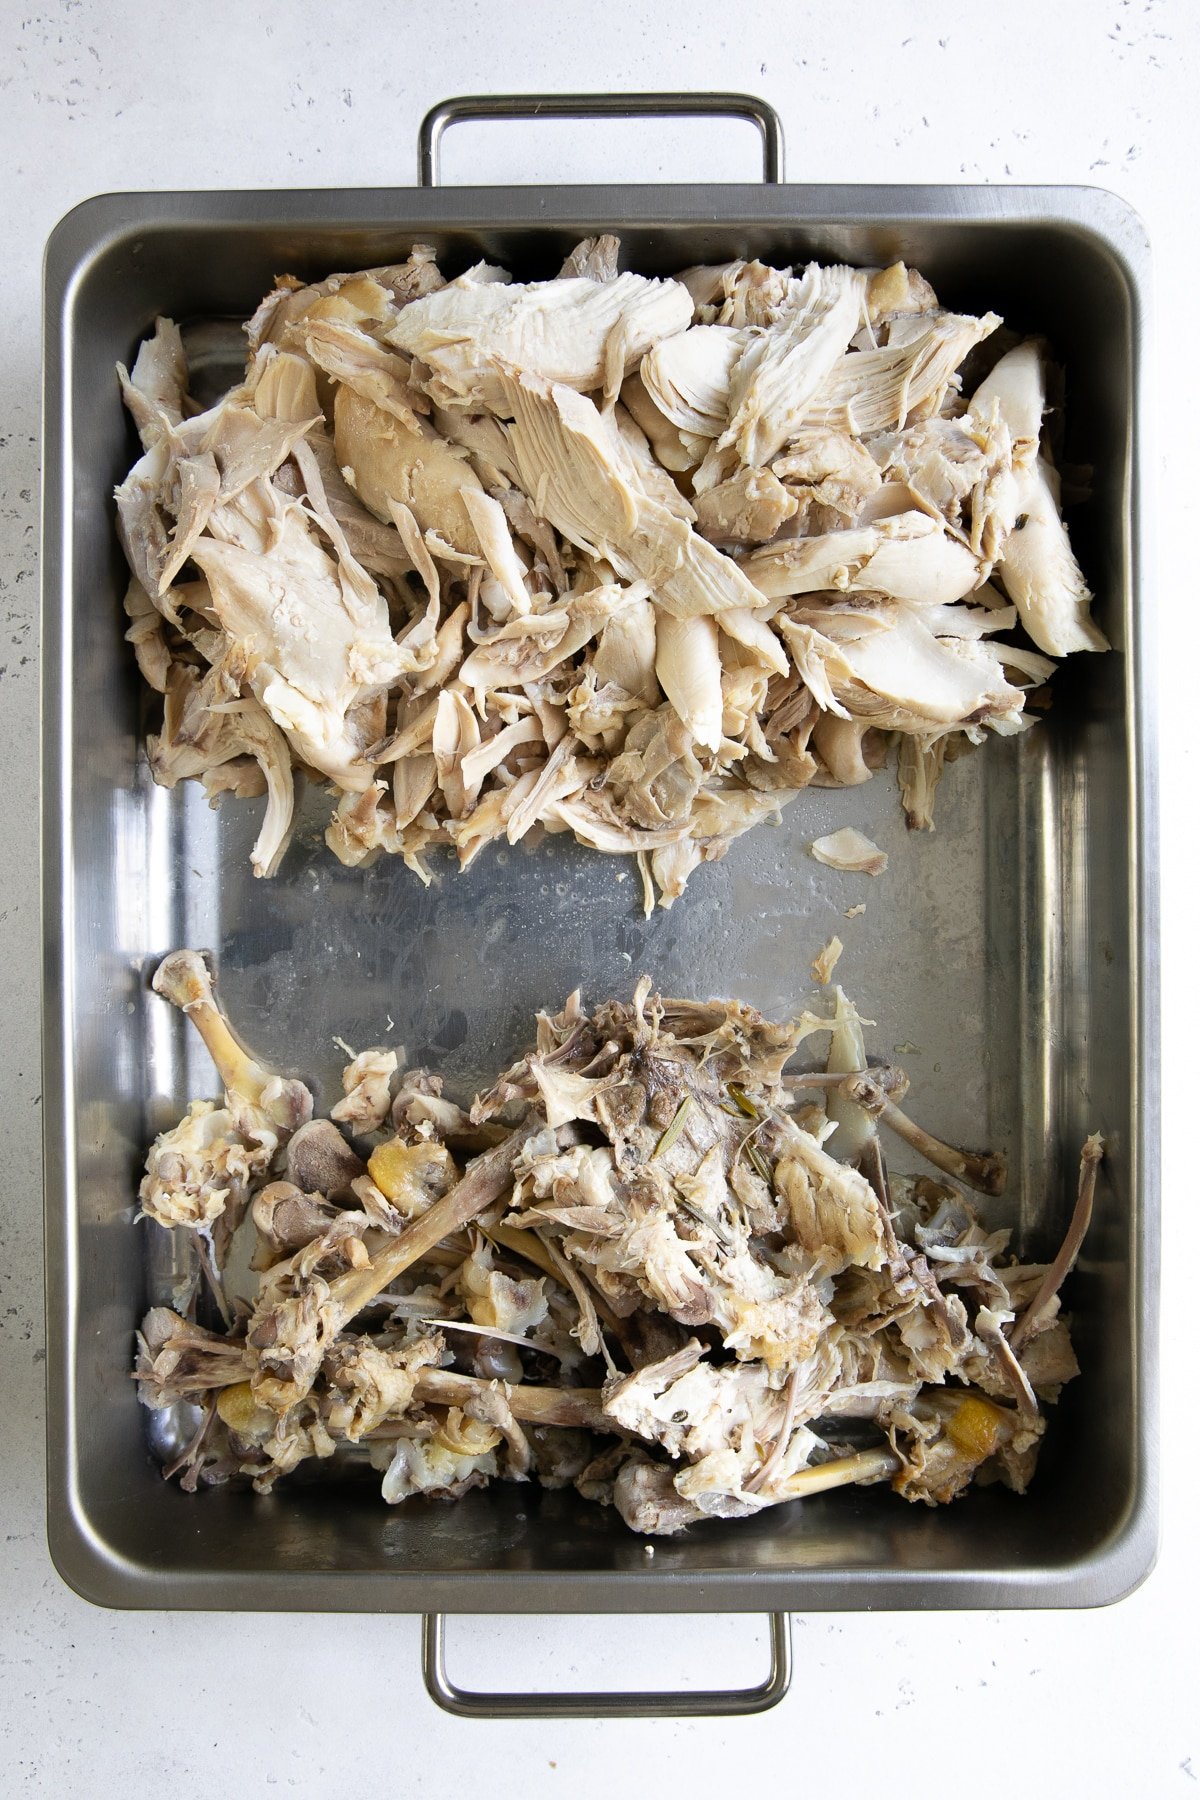 Large roasting pan with shredded chicken on one side and the chicken bones on the other.